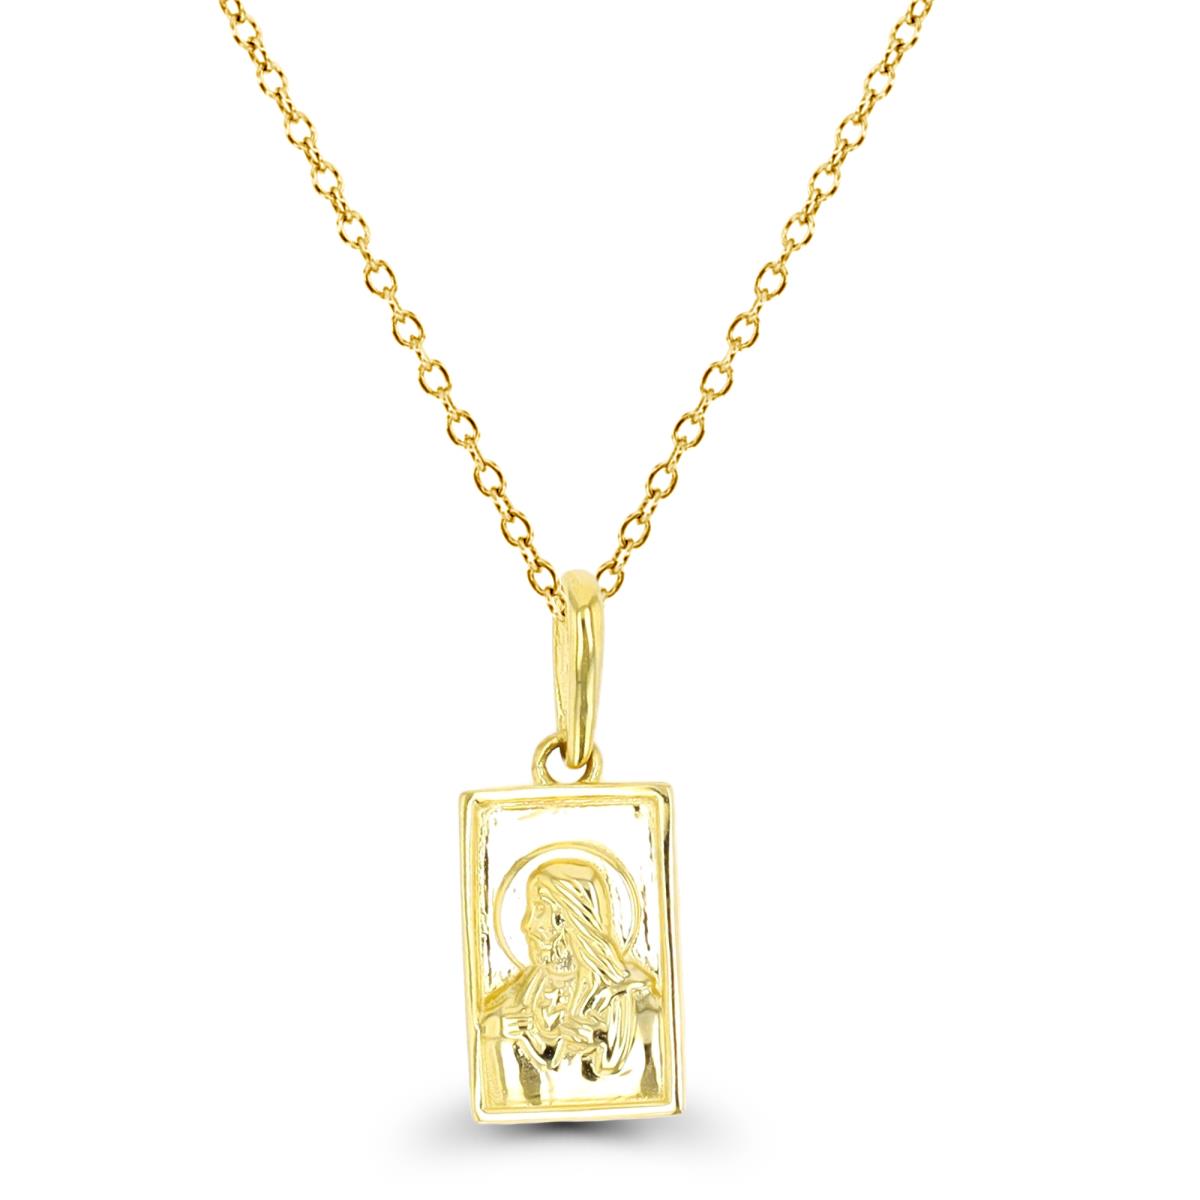 10K Yellow Gold Jesus Medal 18" Necklace